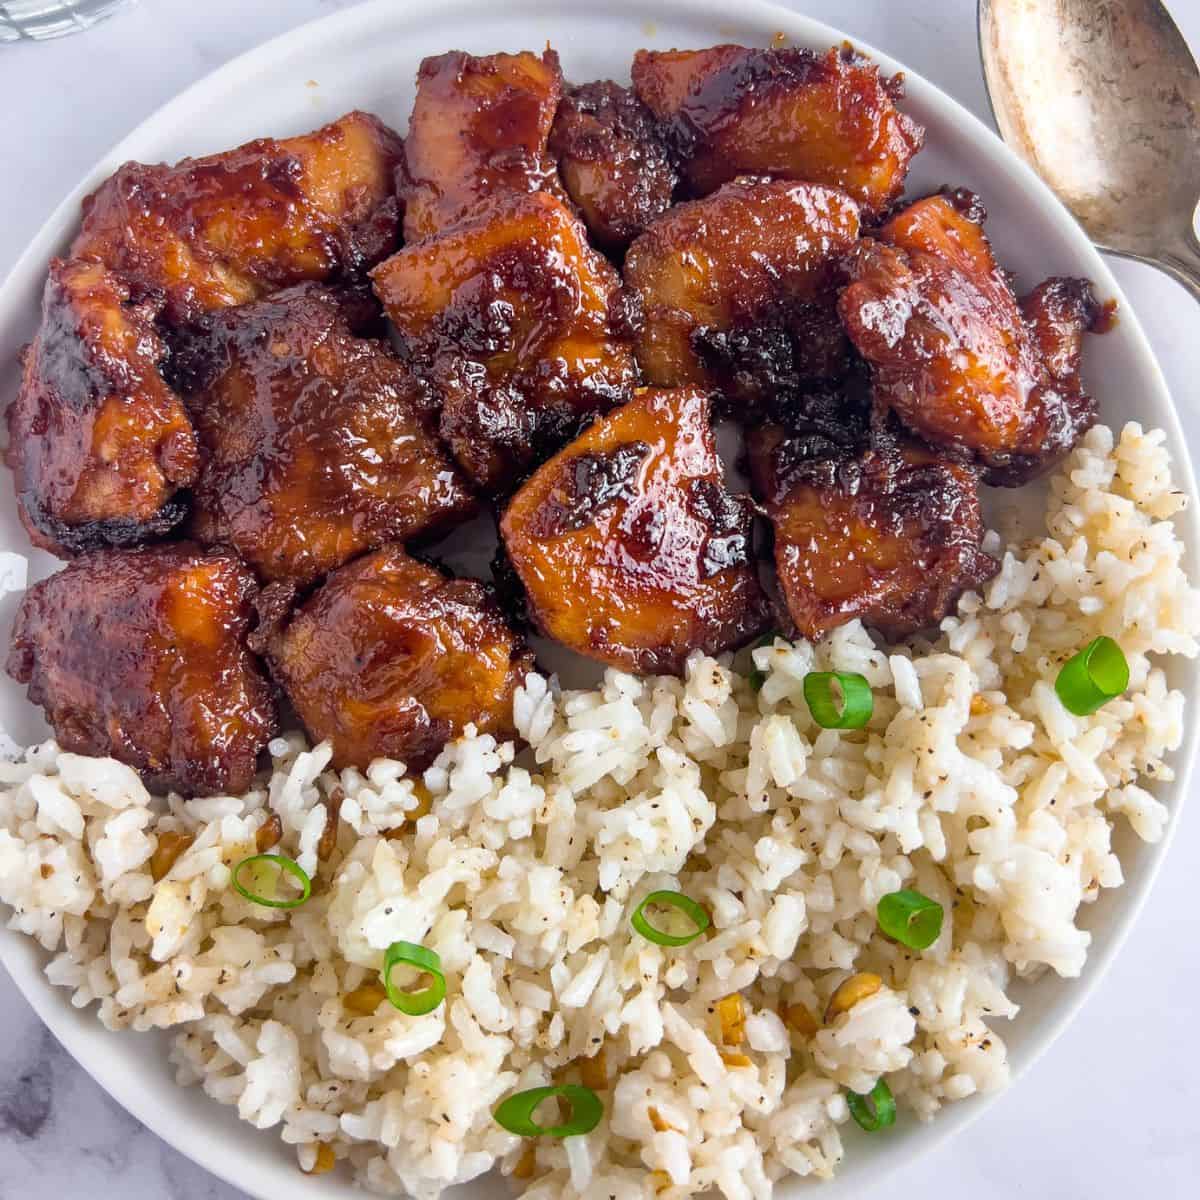 Chicken tocino in a plate with garli fried rice.